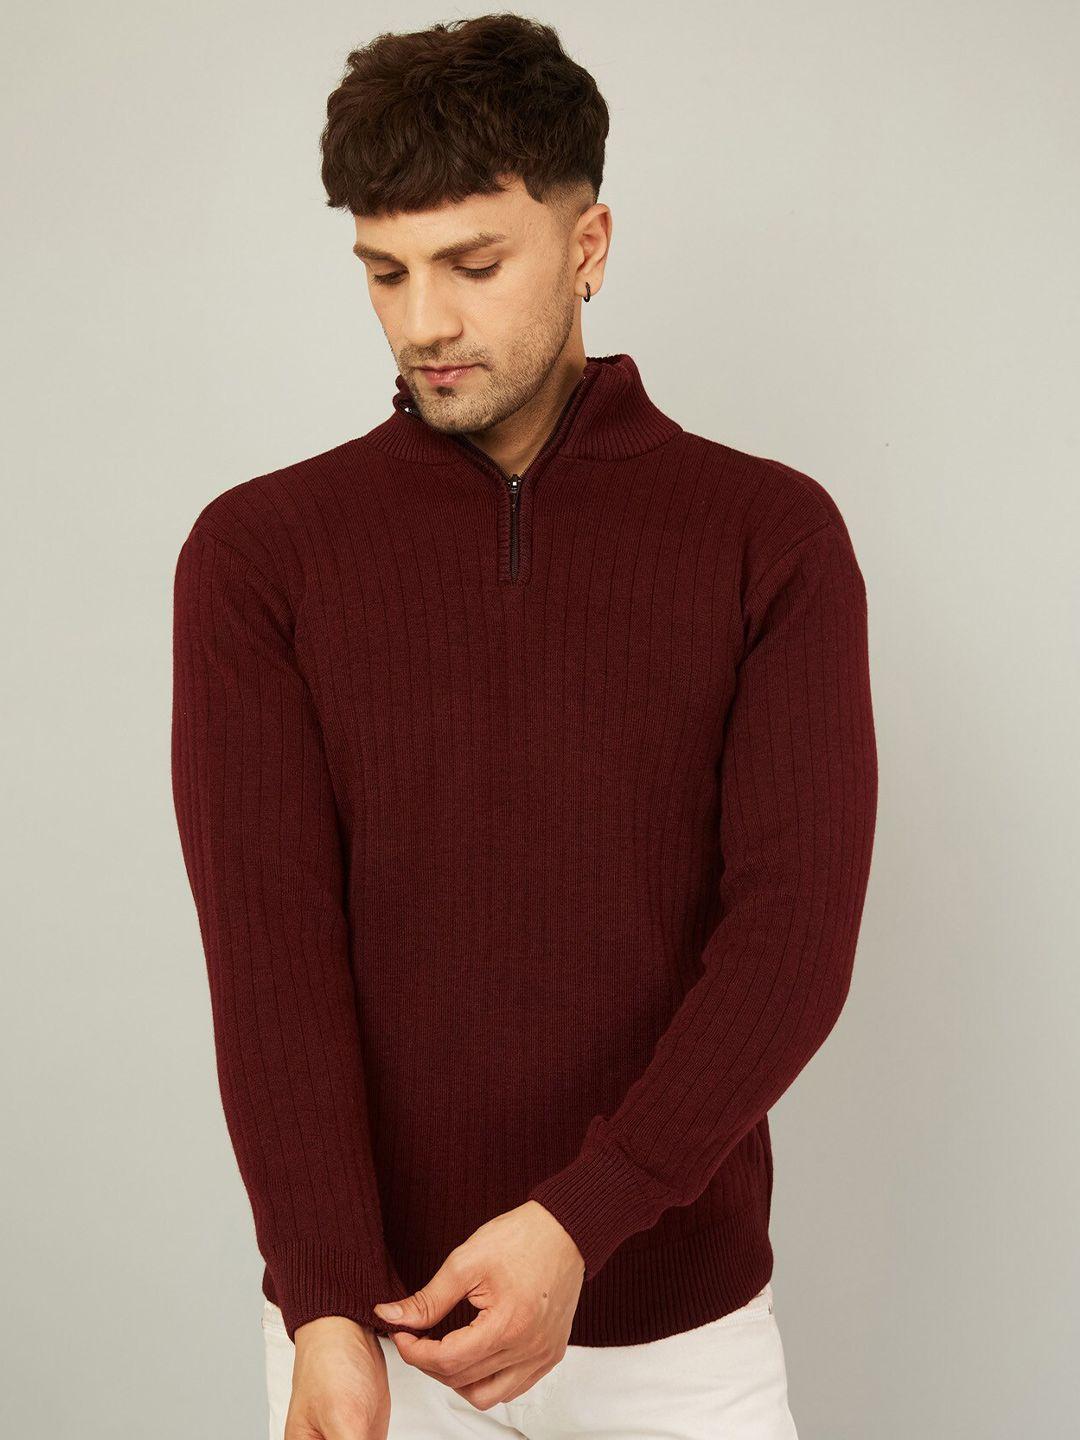 kvetoo ribbed mock collar acrylic pullover sweater